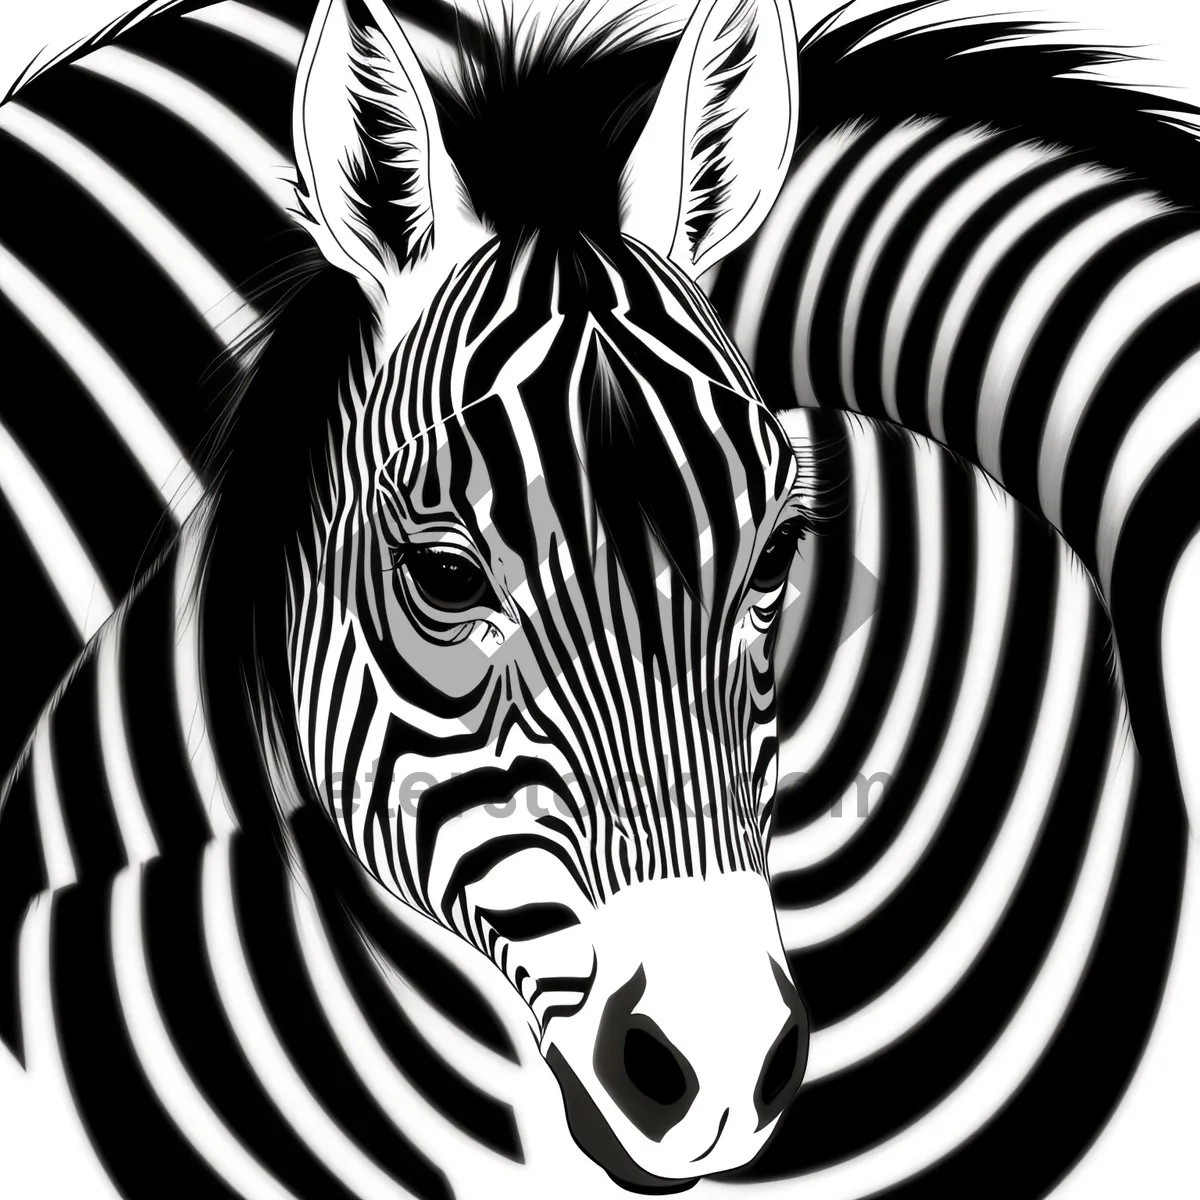 Picture of Striped Equine Majesty - A Stunning Zebra in the Wild